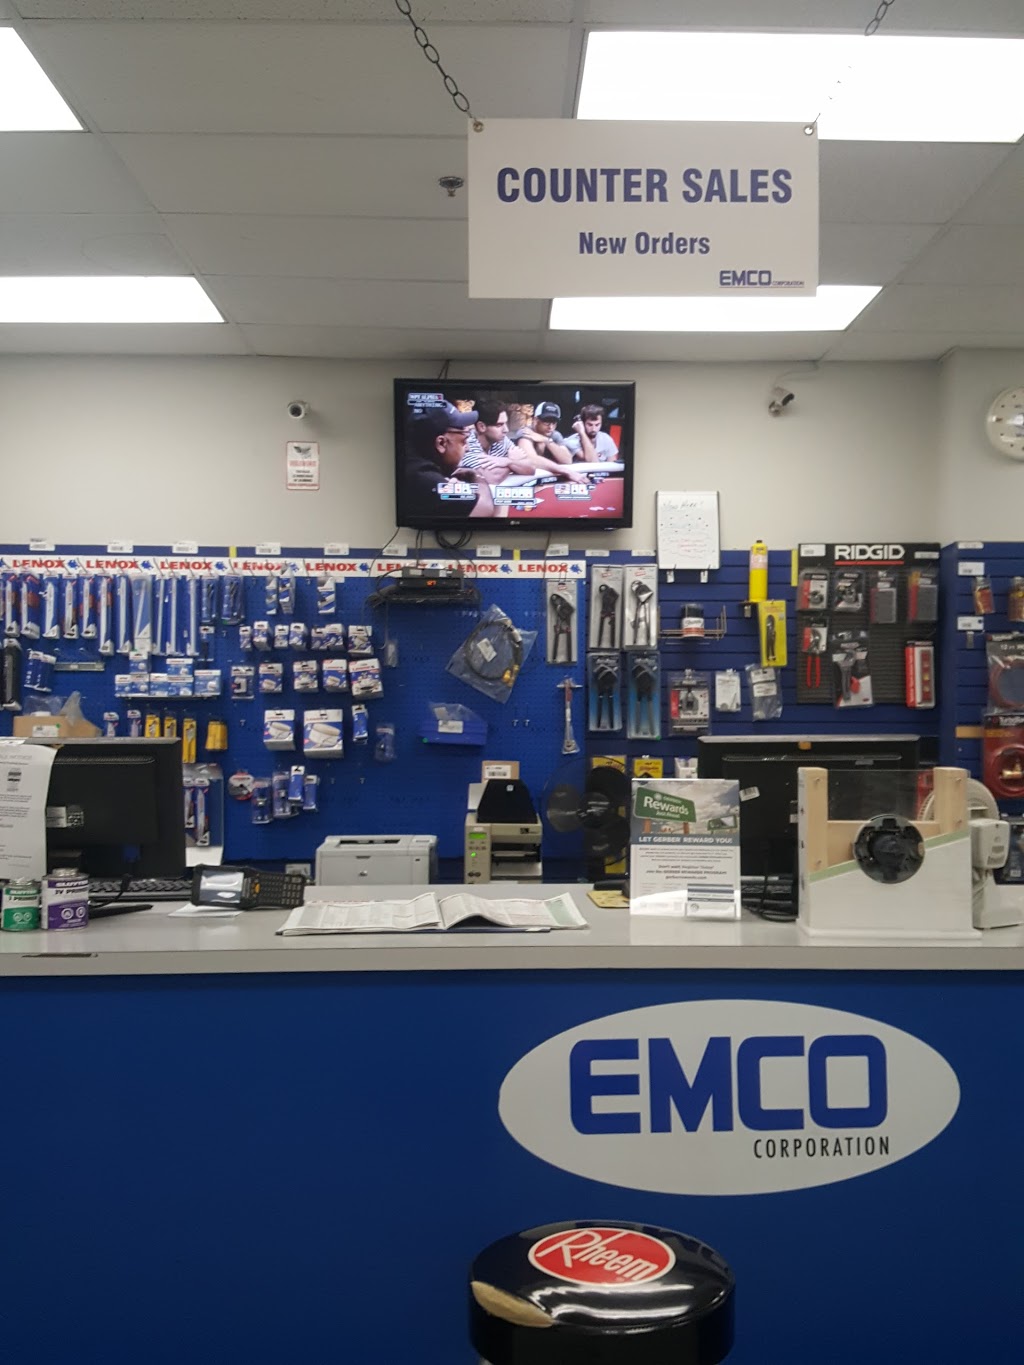 EMCO Calgary Foothills | store | 7110 44 St SE, Calgary, AB T2C 4Z3, Canada | 4032526621 OR +1 403-252-6621